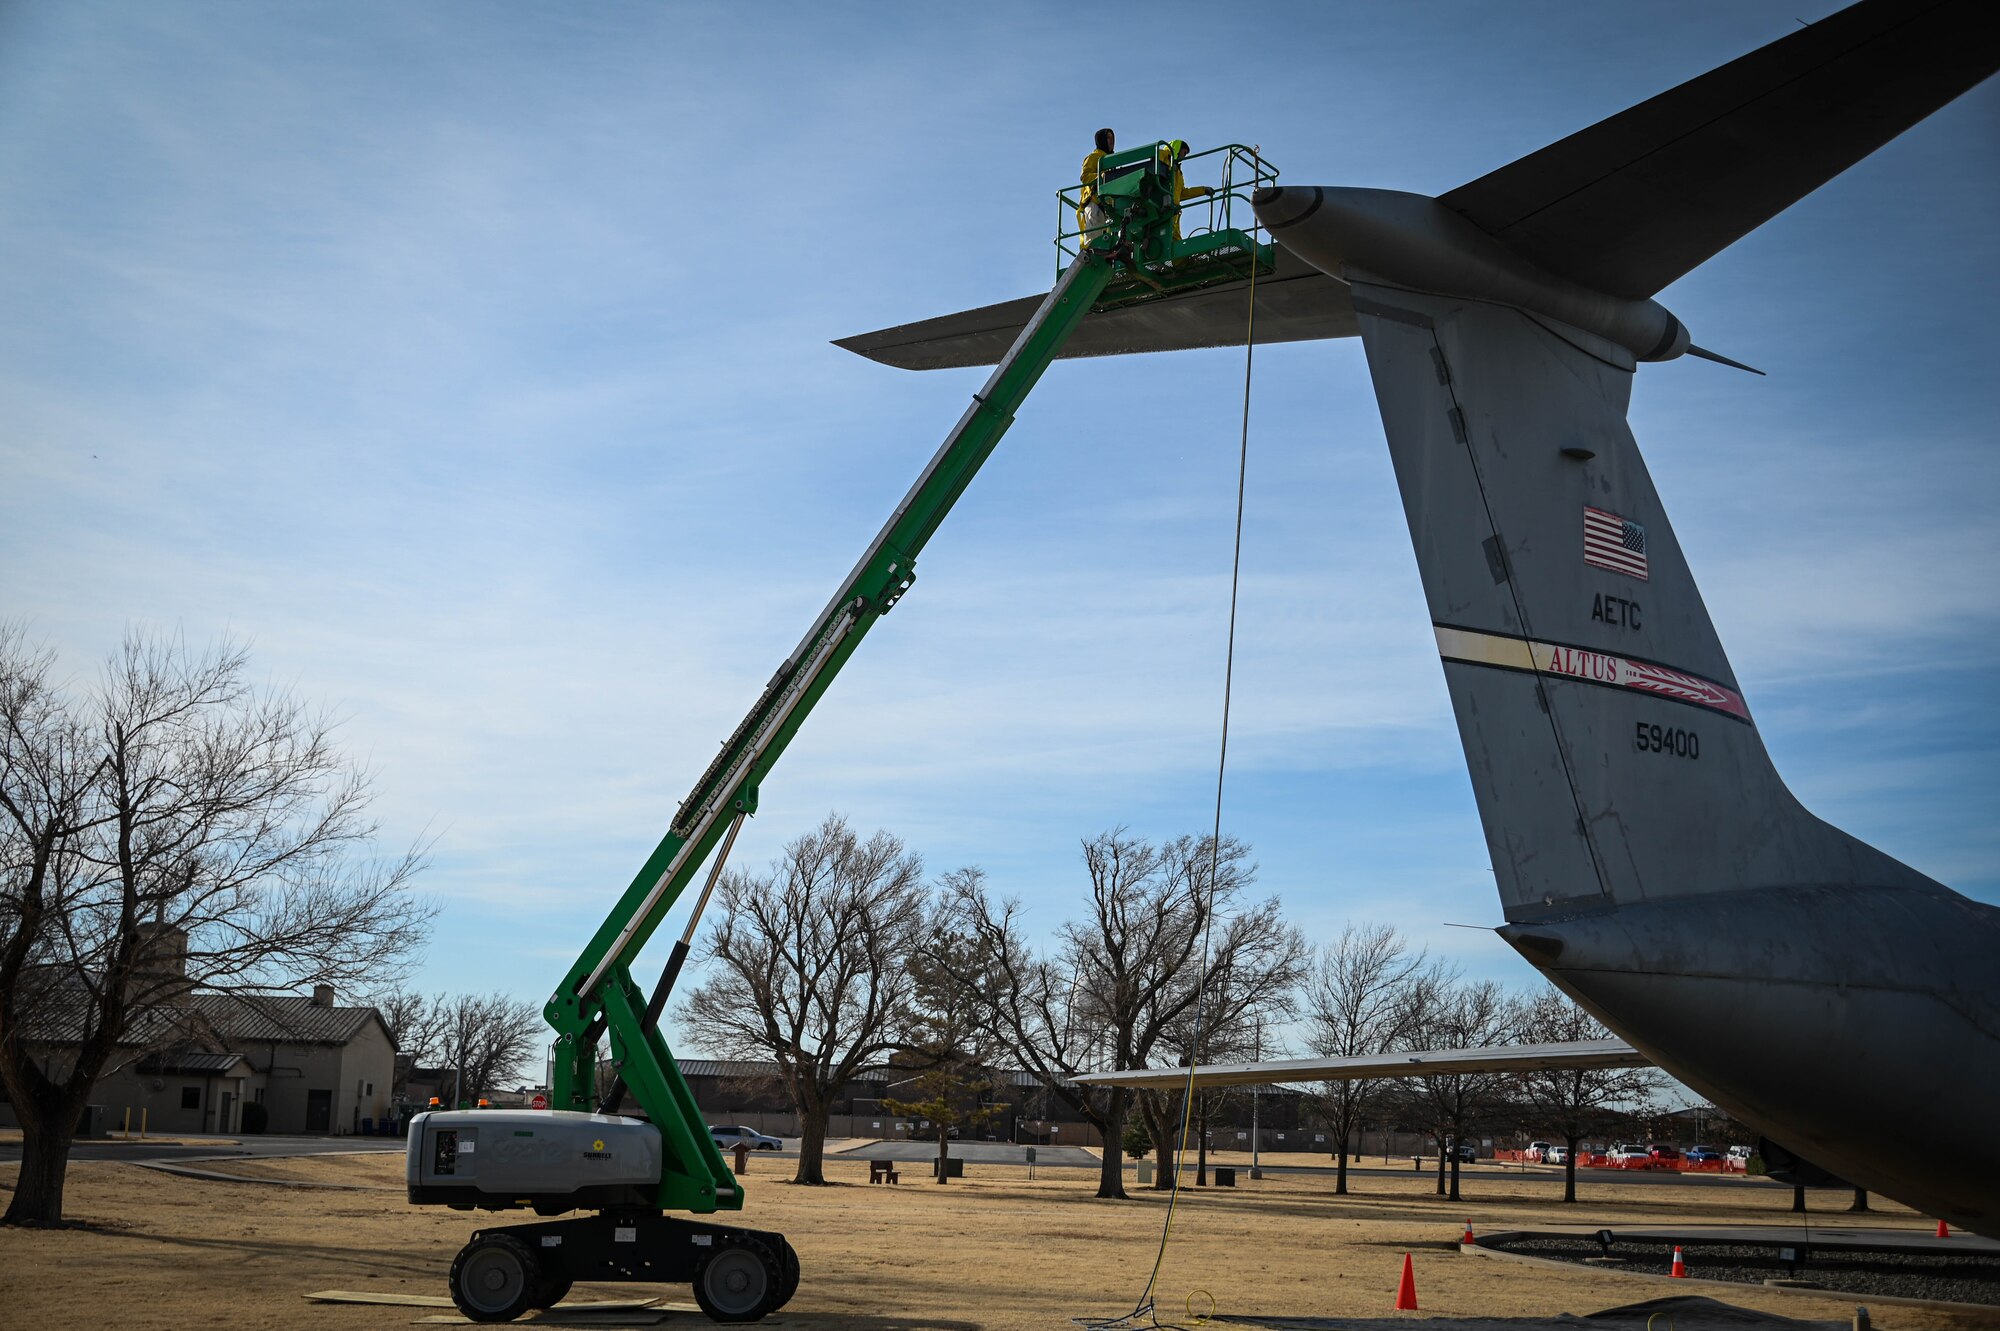 Two technicians wash a static C-141 Starlifter at Altus Air Force Base, Oklahoma, Feb. 15, 2022. Historians and historical property custodians are responsible for preserving and protecting the history, heritage, and culture of the Air Force through collections, exhibits, and displays. (U.S. Air Force photo by Senior Airman Kayla Christenson)